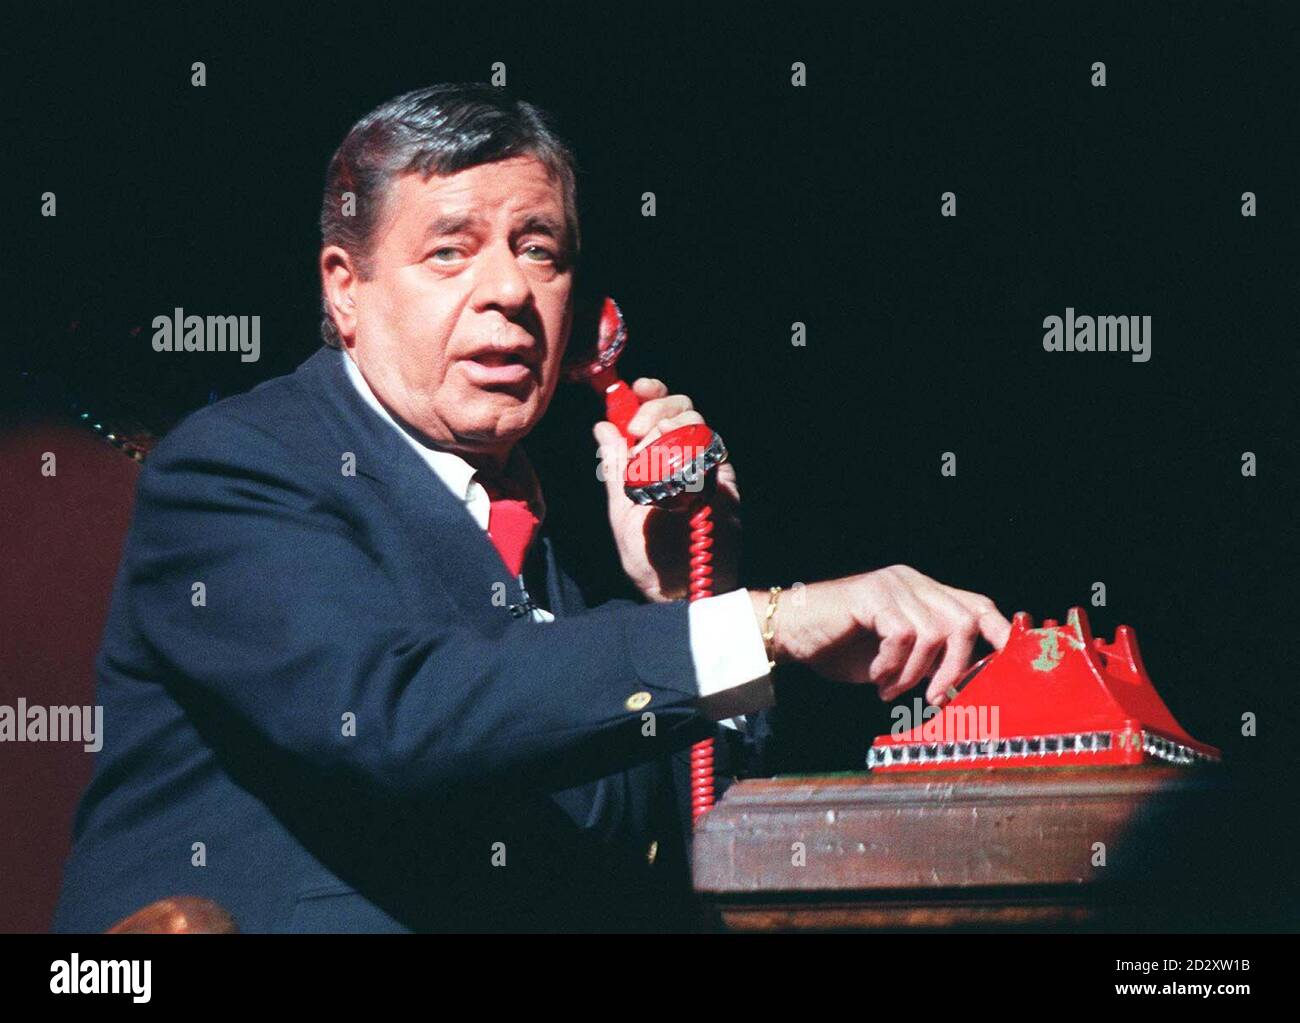 Legendary American entertainer, Jerry Lewis, in character and costume for his debut in the new musical 'Damn Yankees' beginning at the Adelphi Theatre in London's west end today (Thursday).  Photo by David Giles/PA. Stock Photo